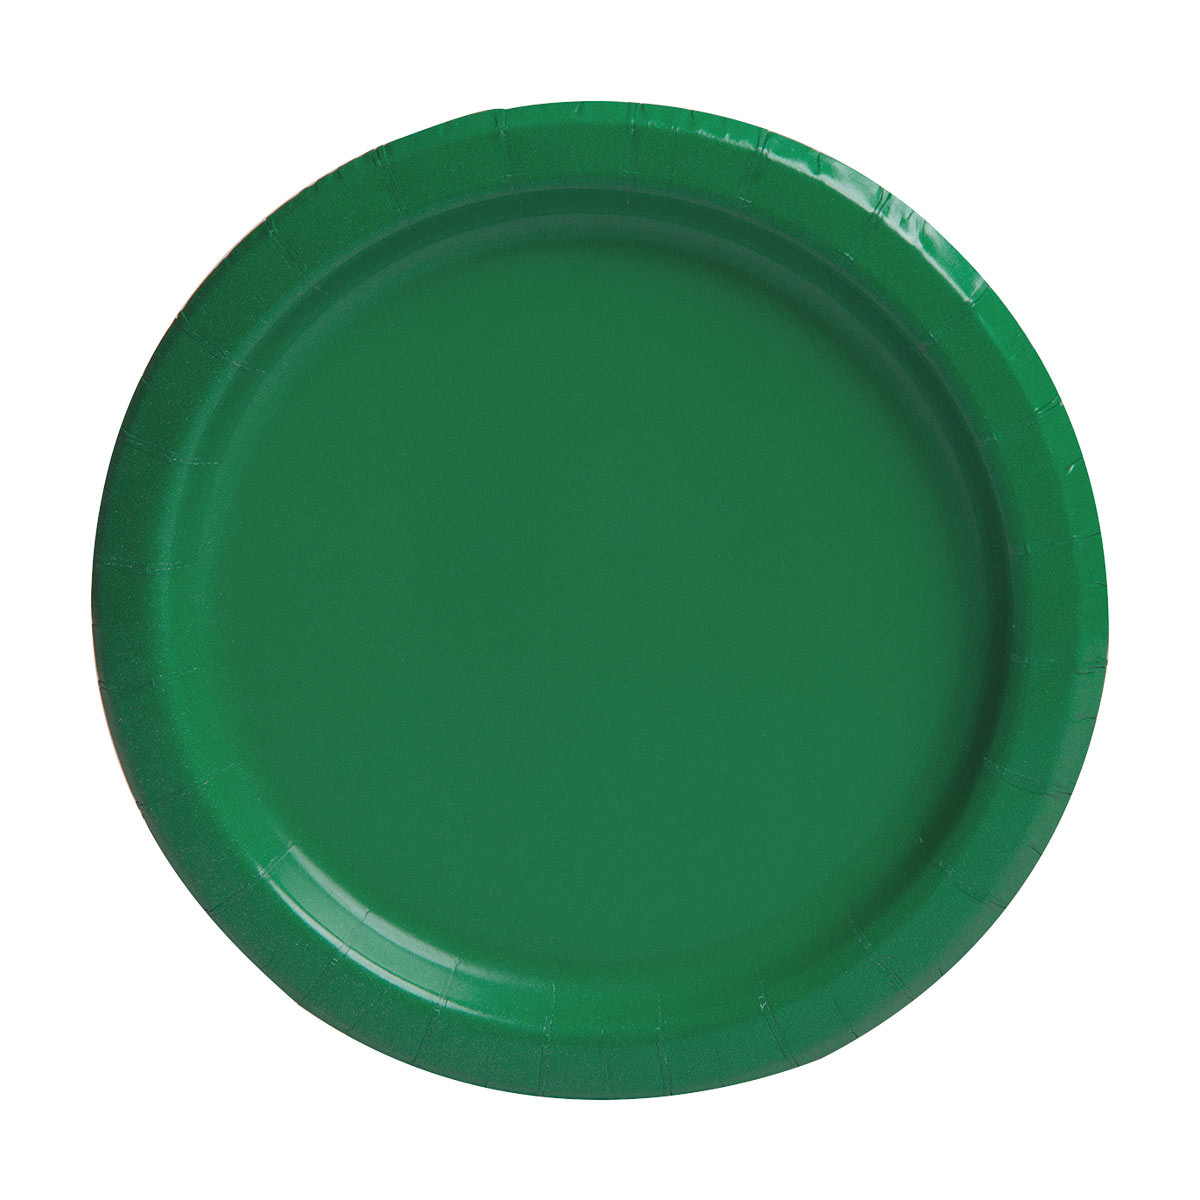 321 Party! Emerald Green Party Plates, 7 in, 16 ct